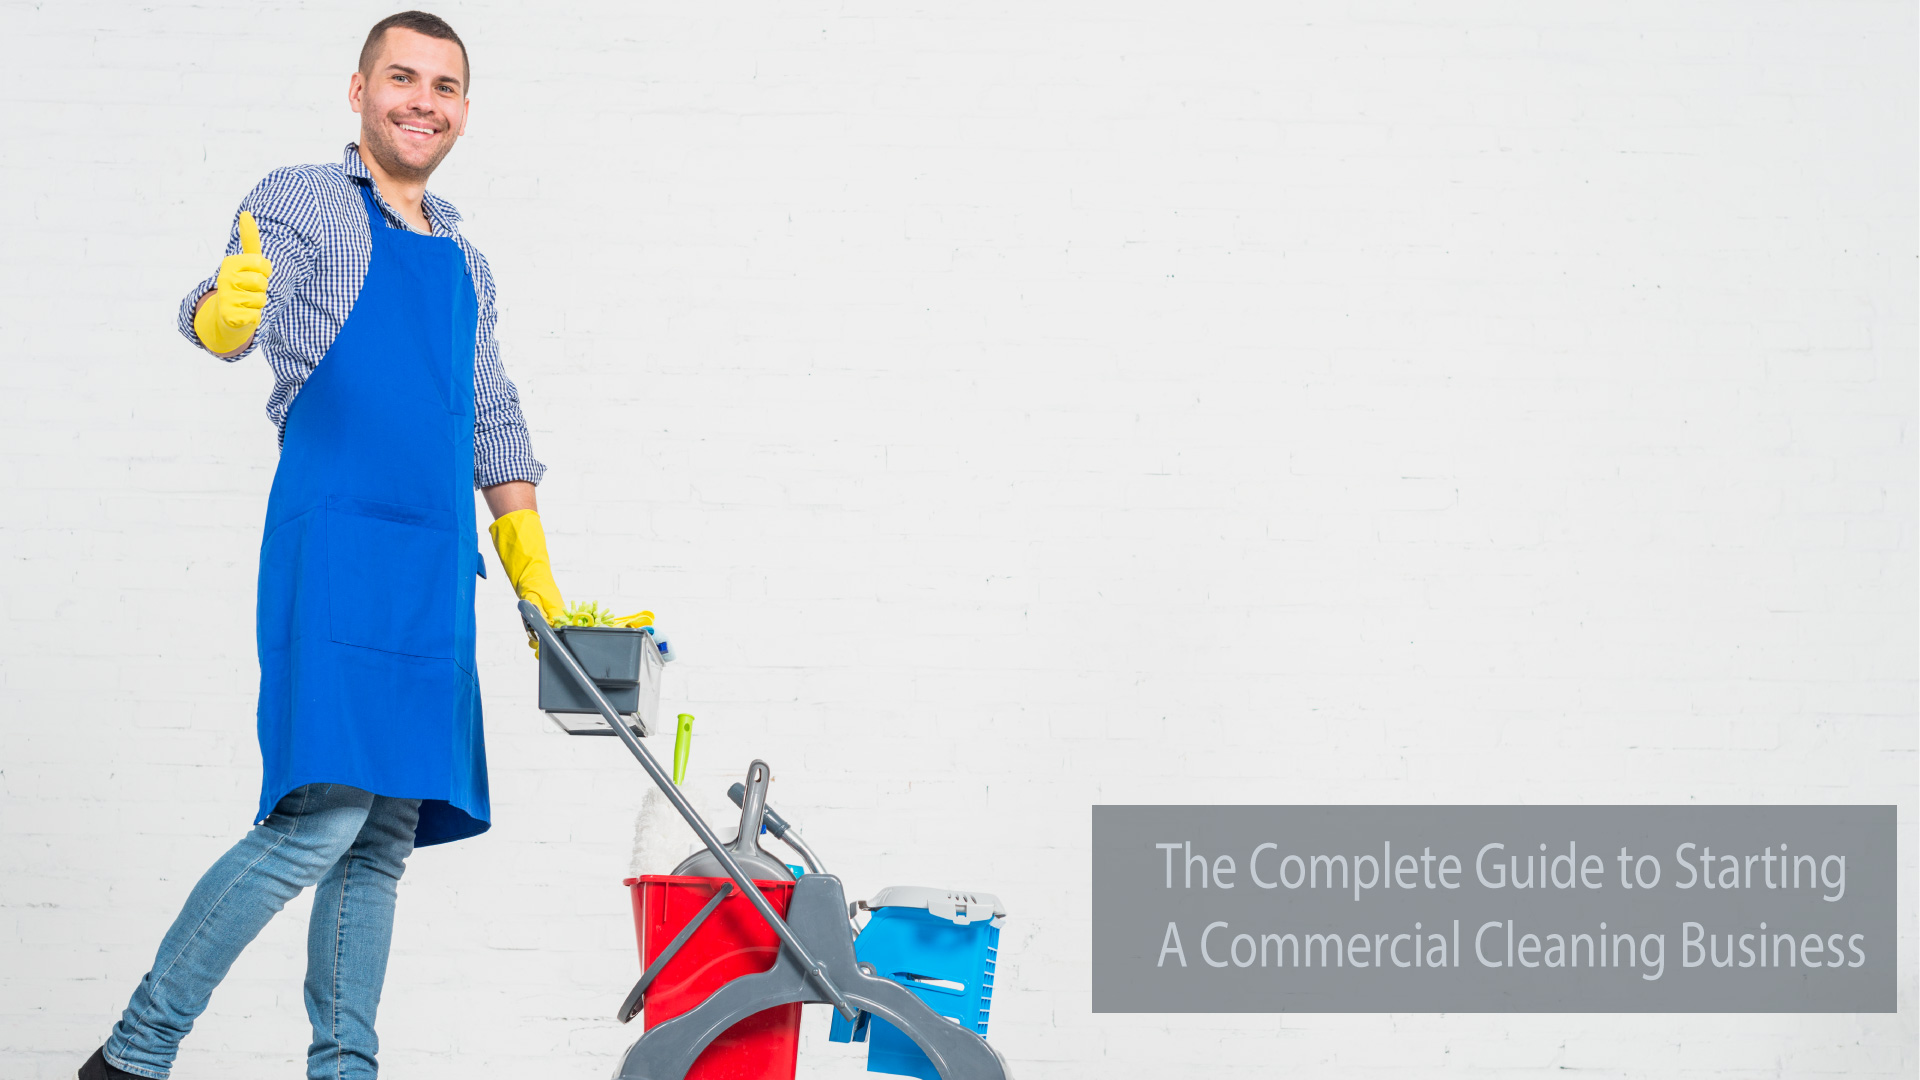 Commercial cleaning business